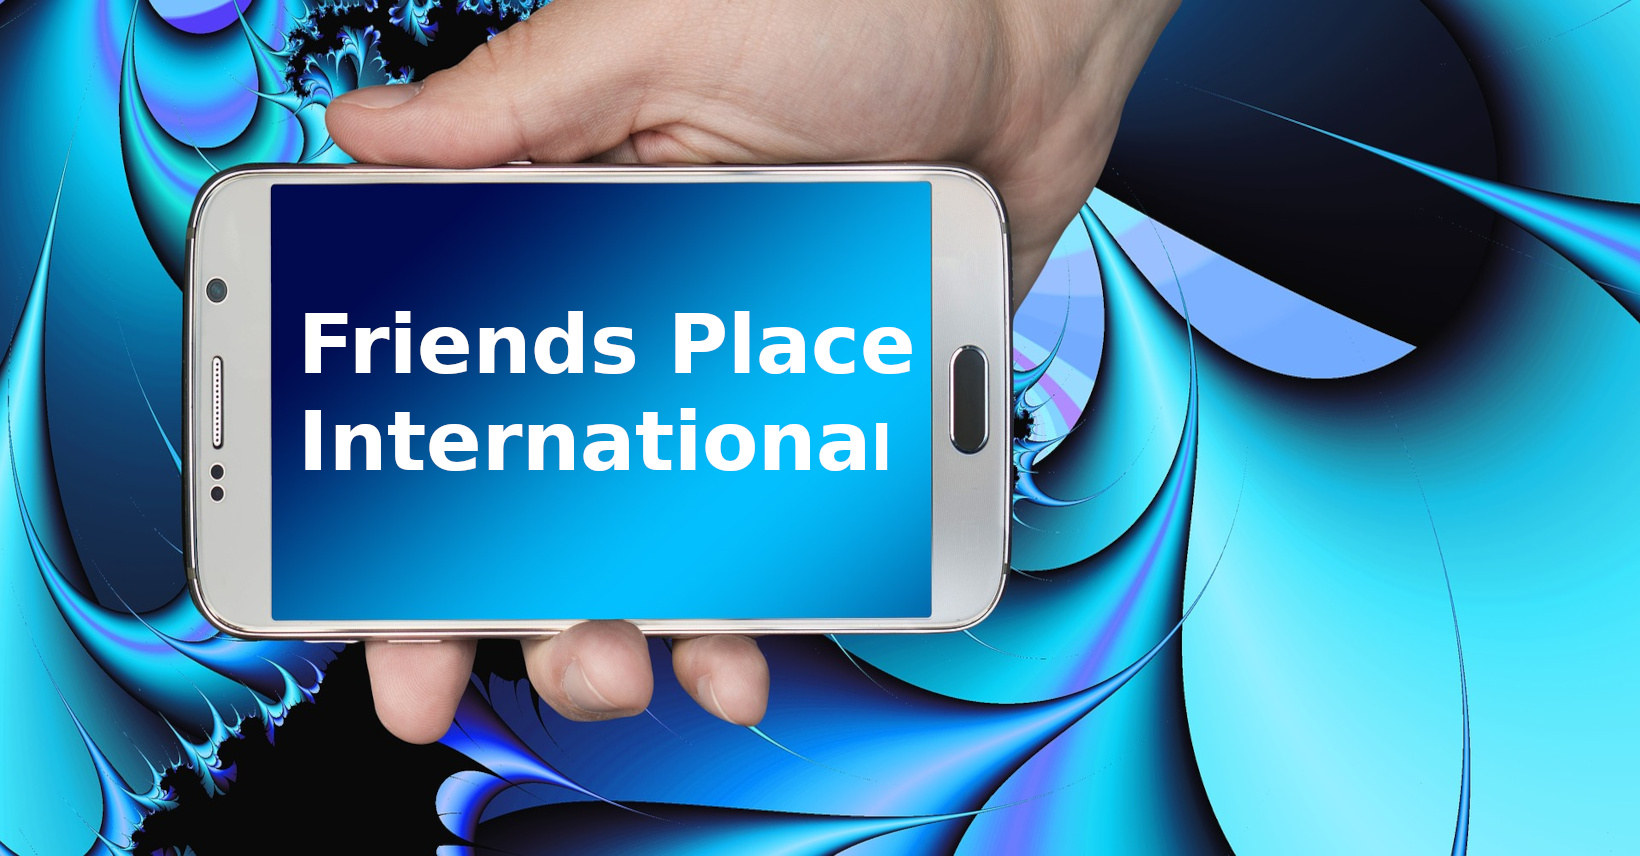 Welcome to FriendsPlace Int